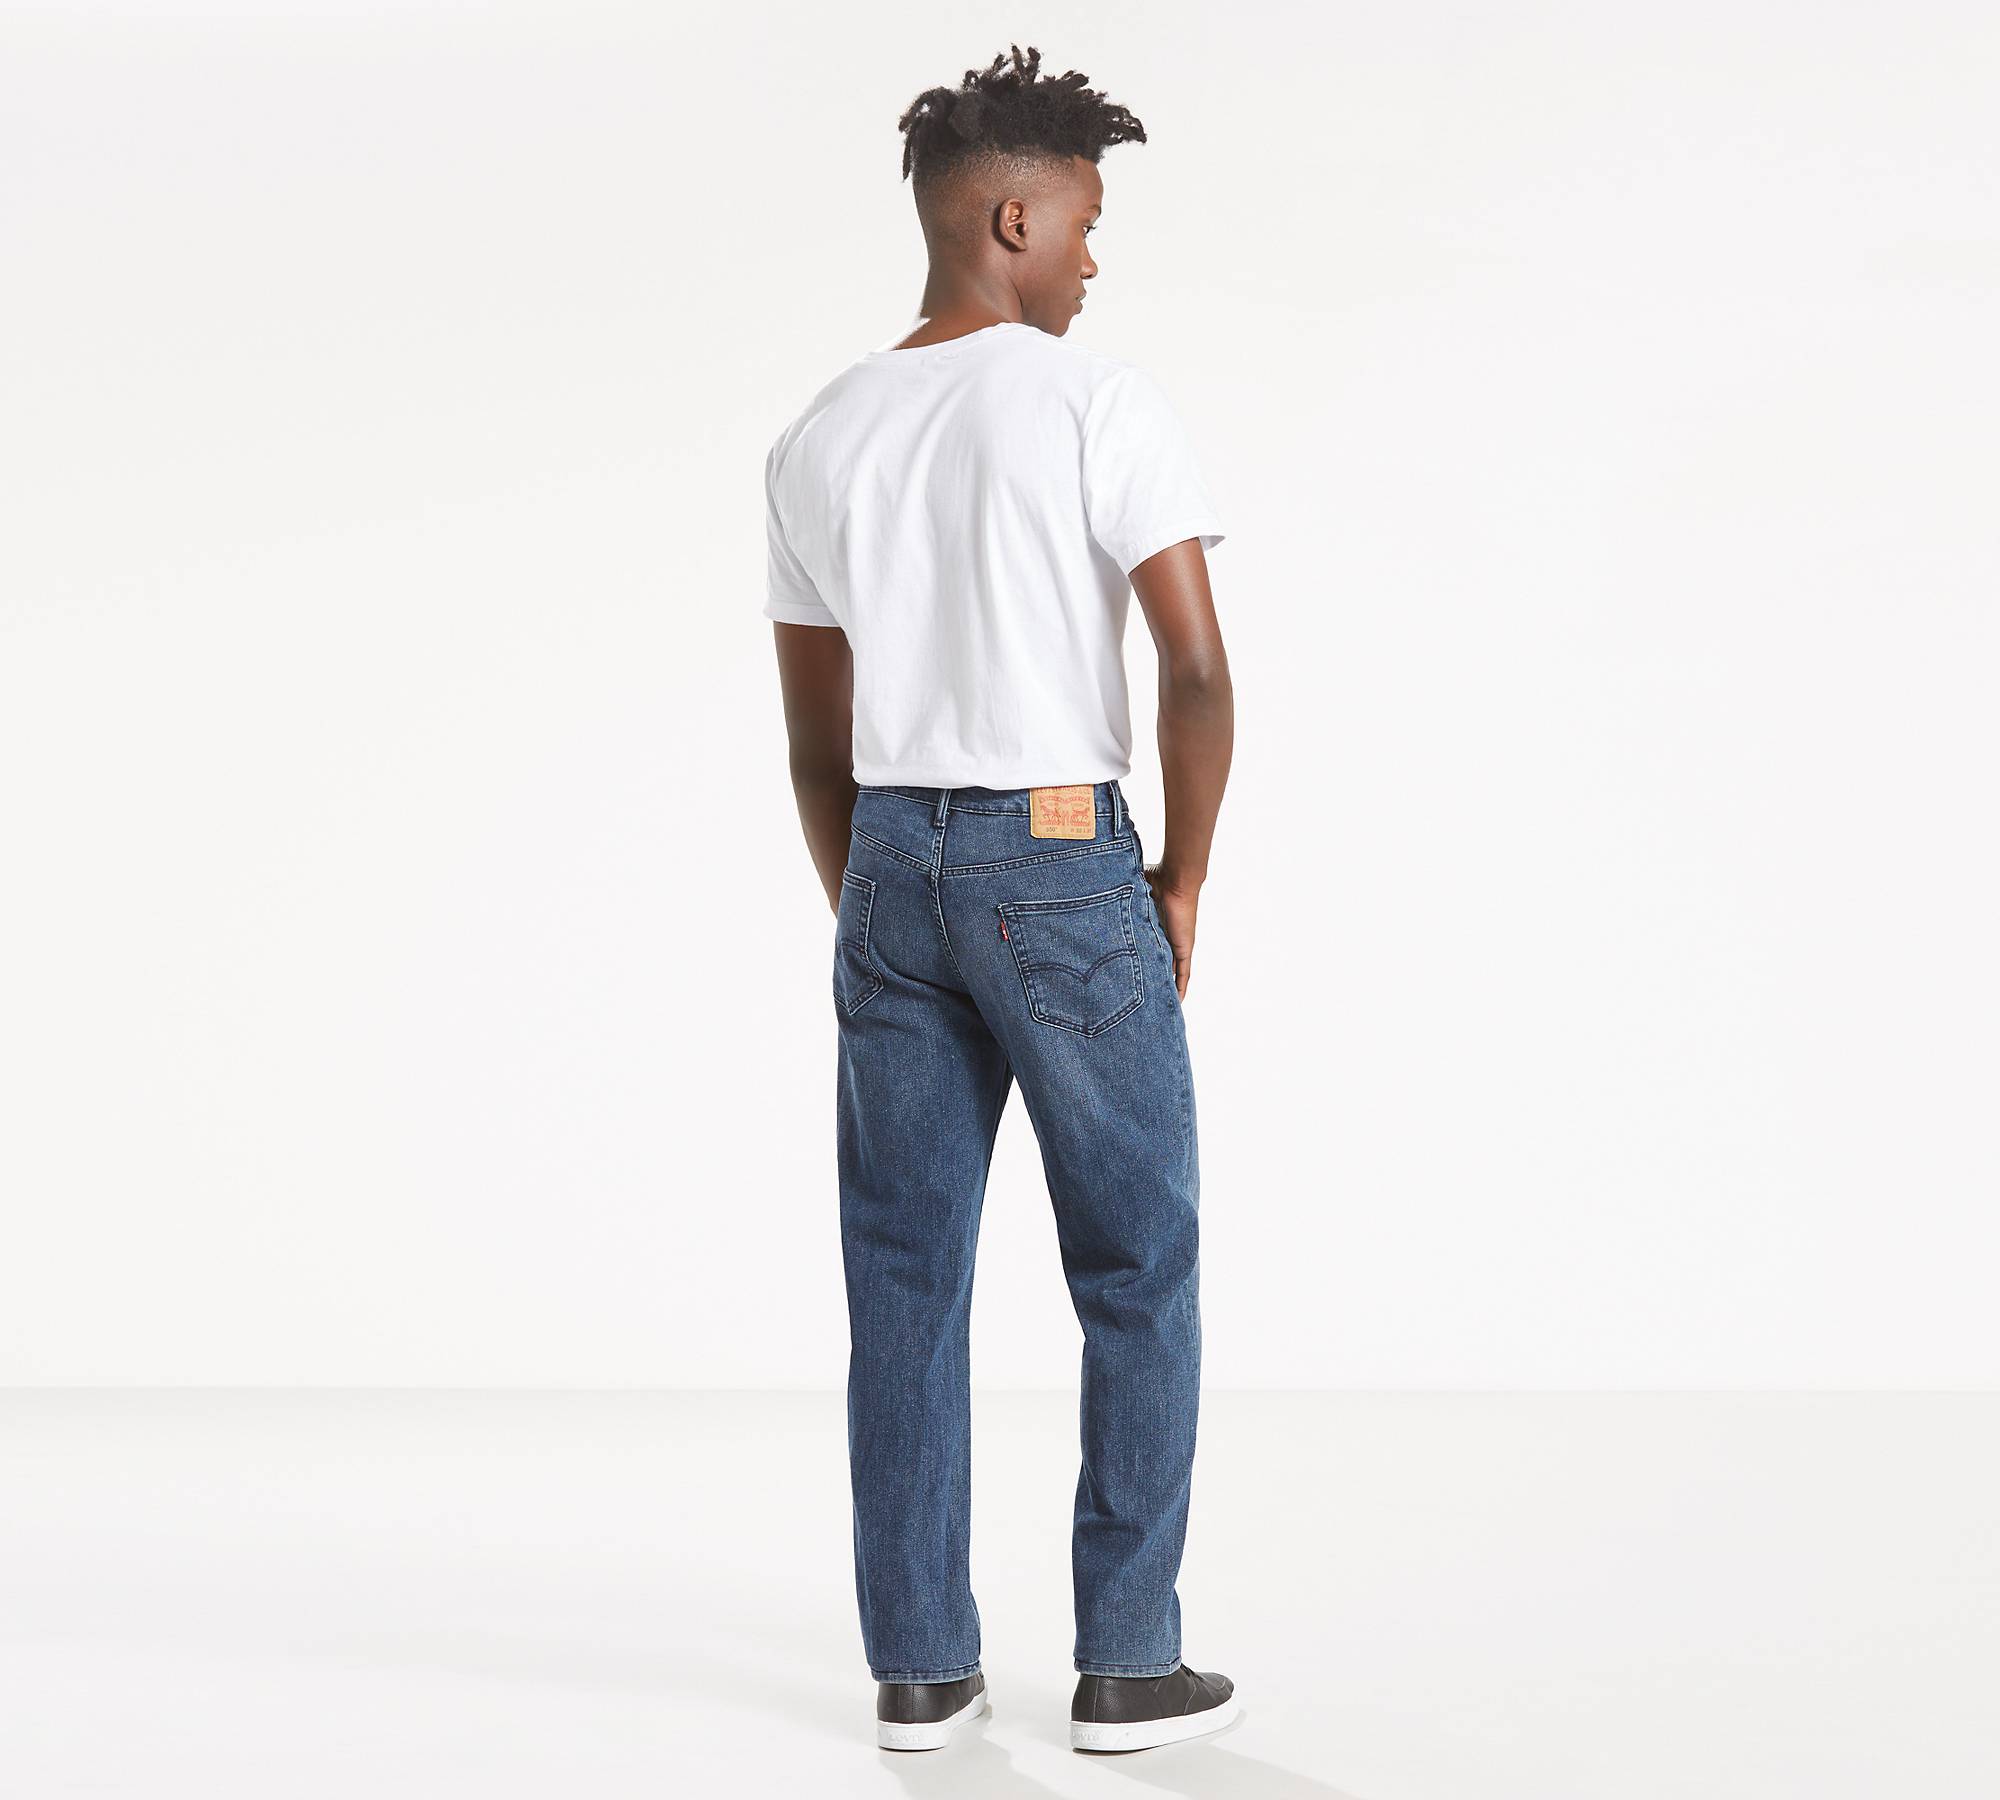 550™ Relaxed Fit Men's Jeans - Medium Wash